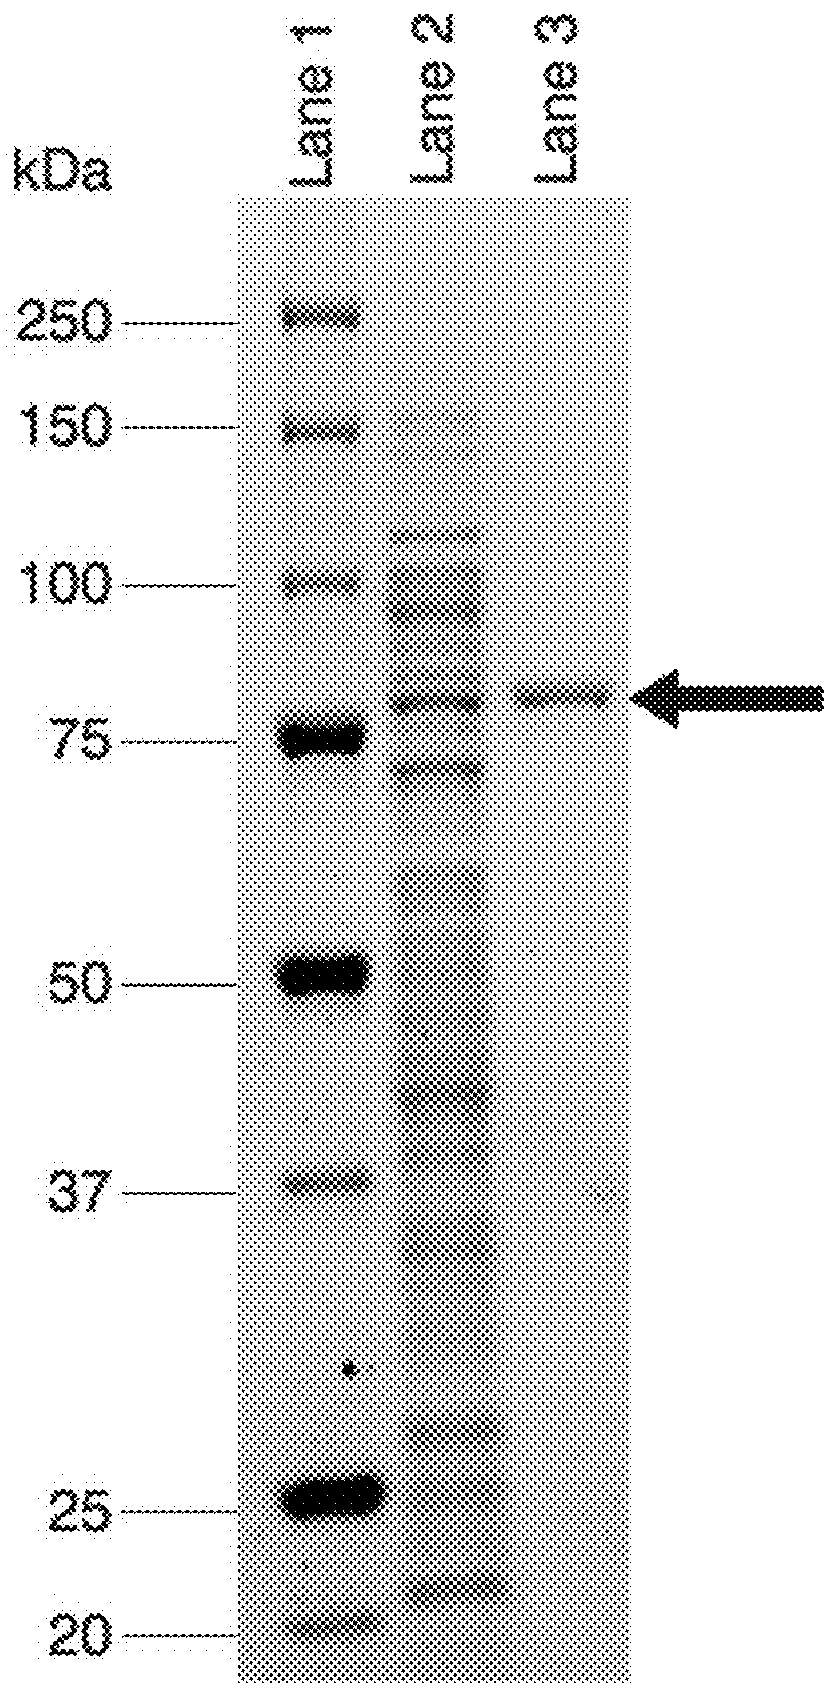 Thermostable beta-xylosidase belonging to GH family 3